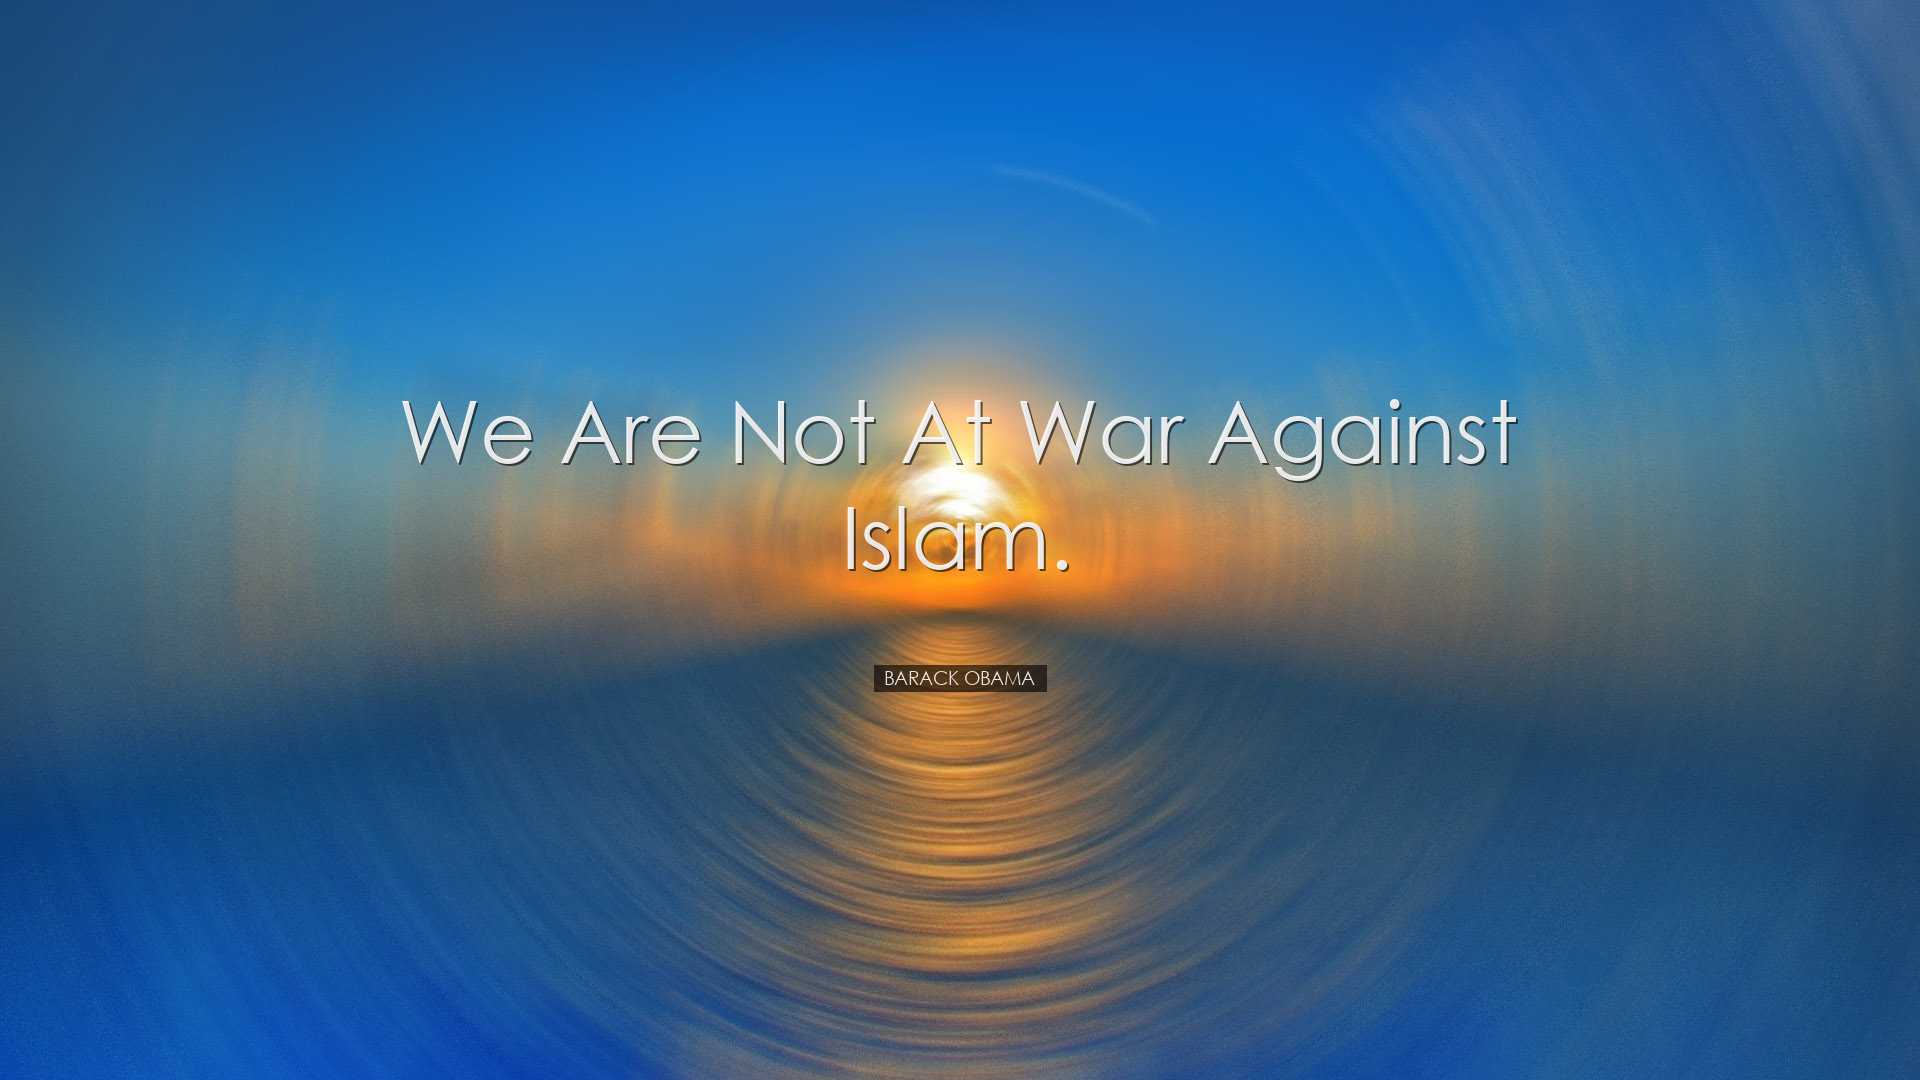 We are not at war against Islam. - Barack Obama